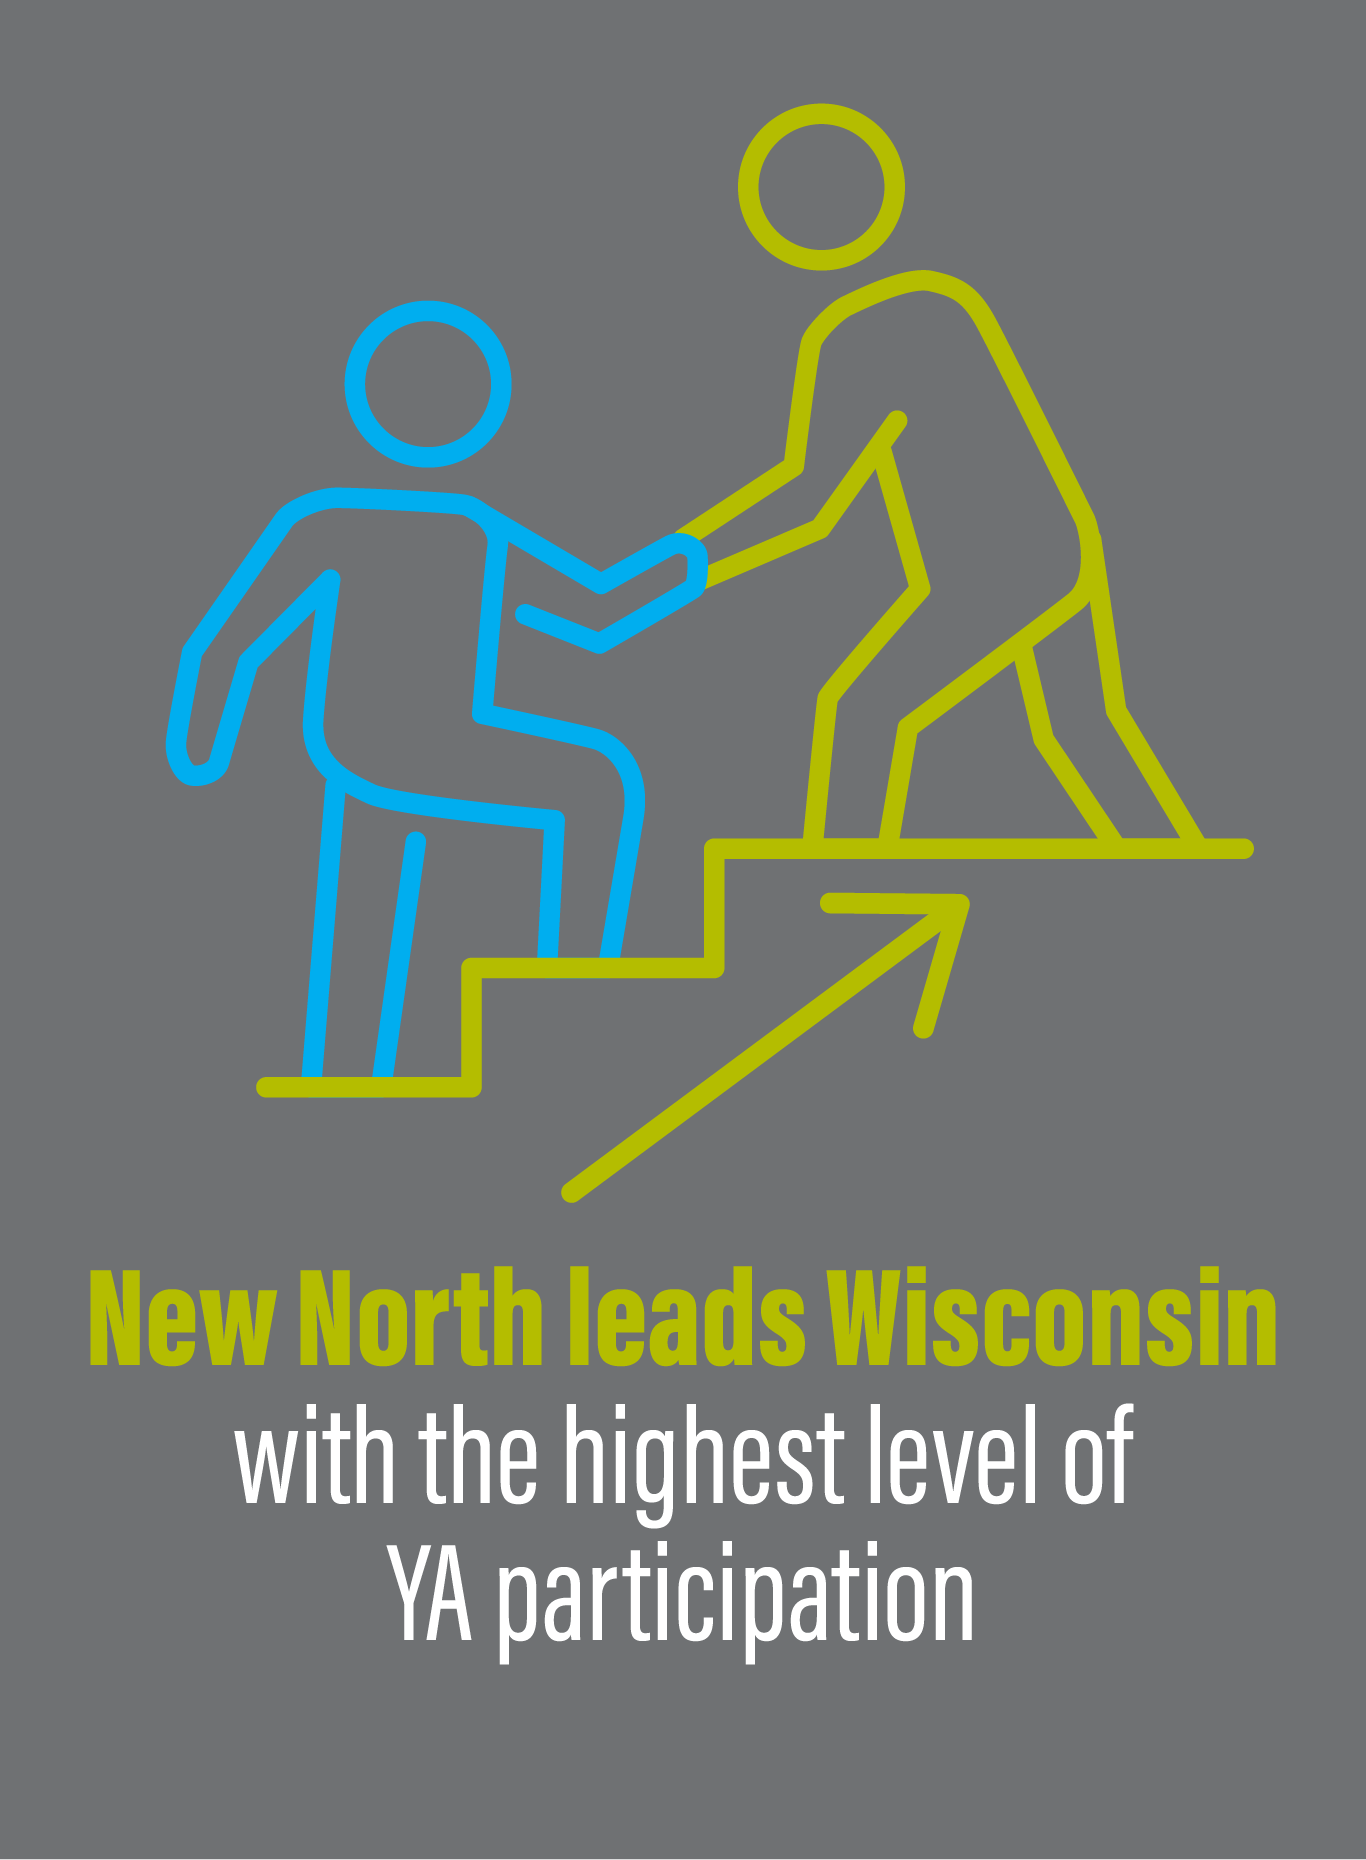 New North leads Wisconsin with the highest level of YA participation